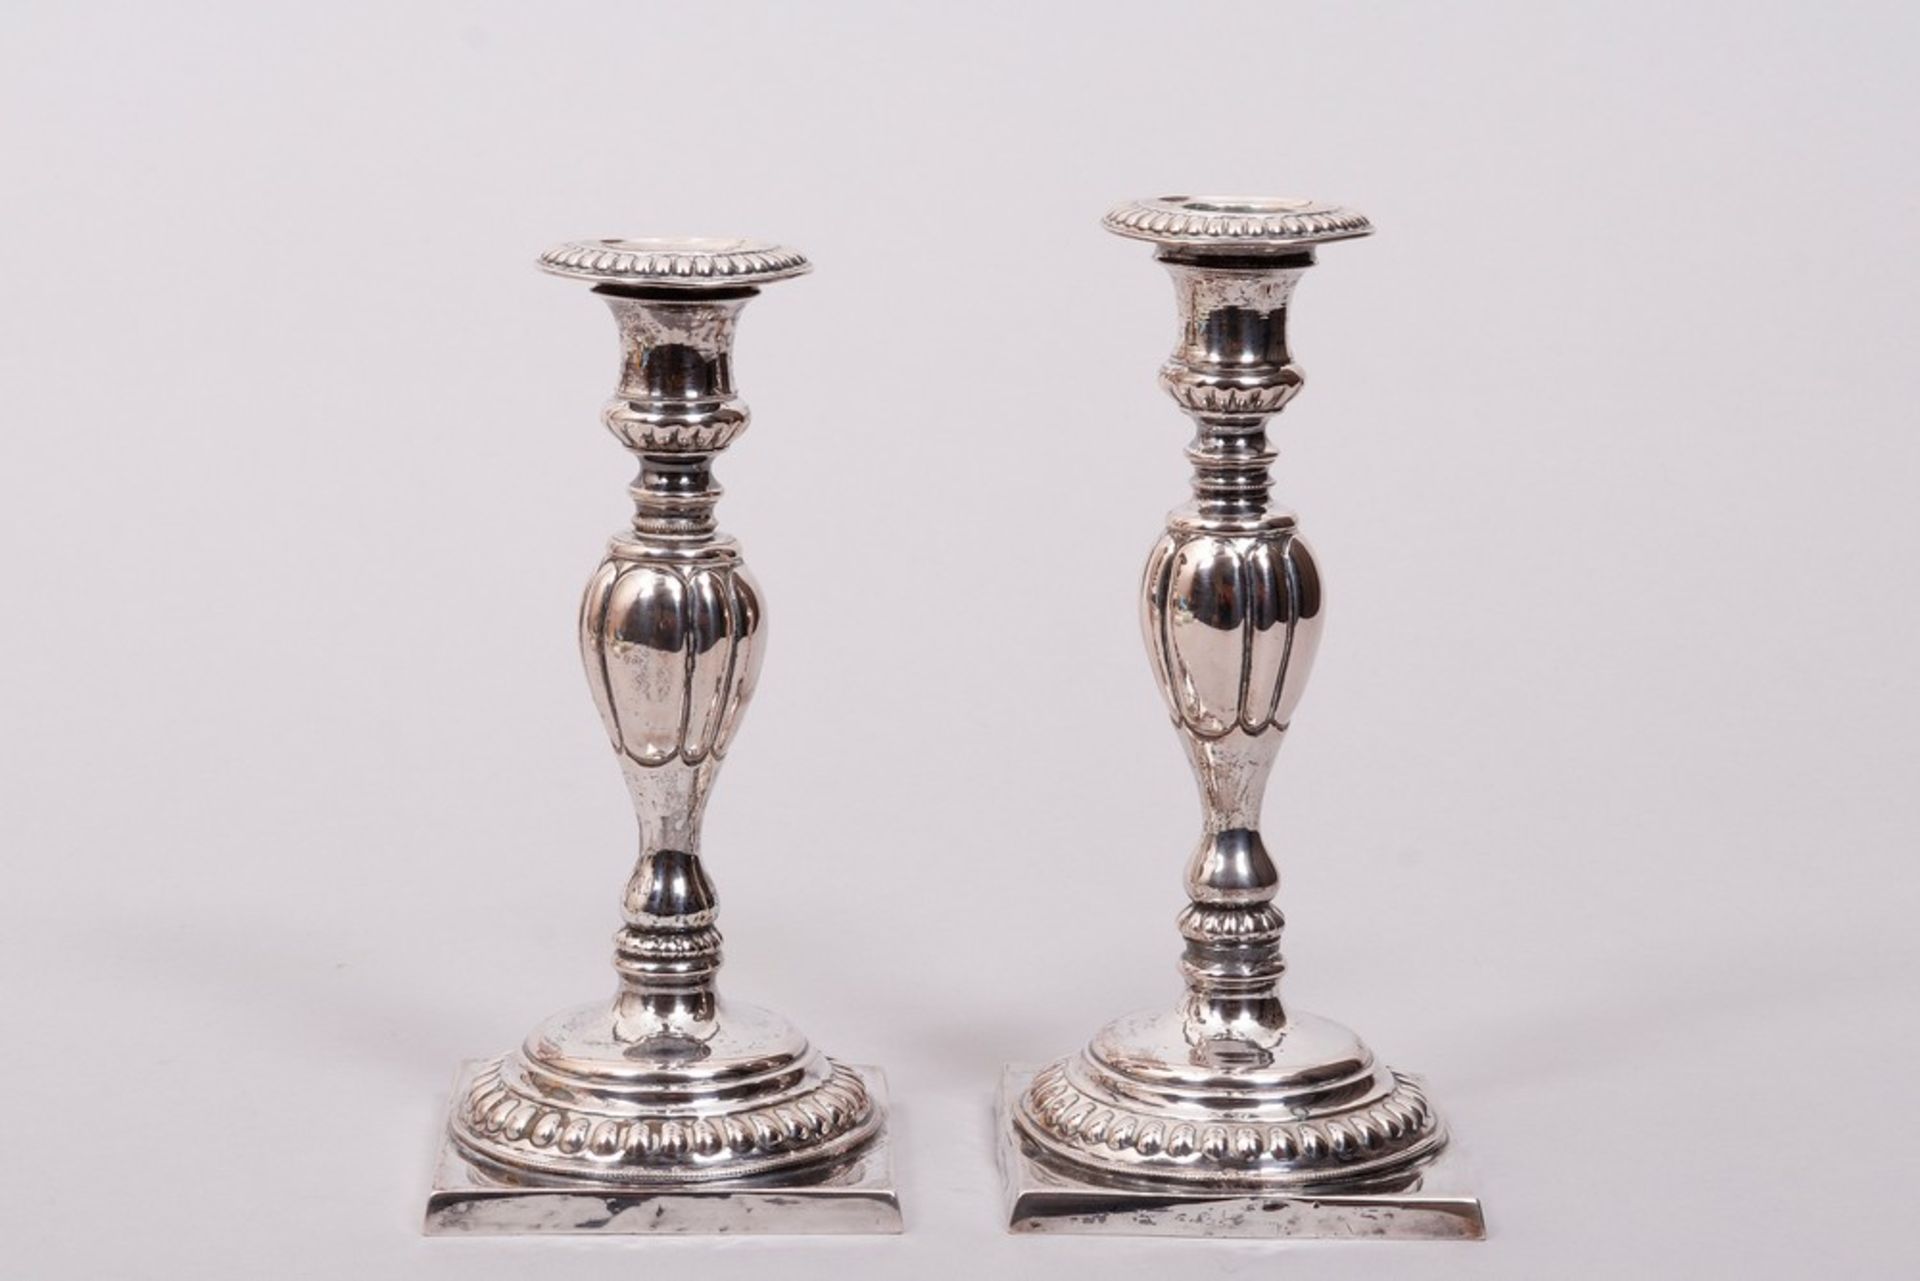 Pair of table candlesticks, silver, Berlin, 1st half 19th C.